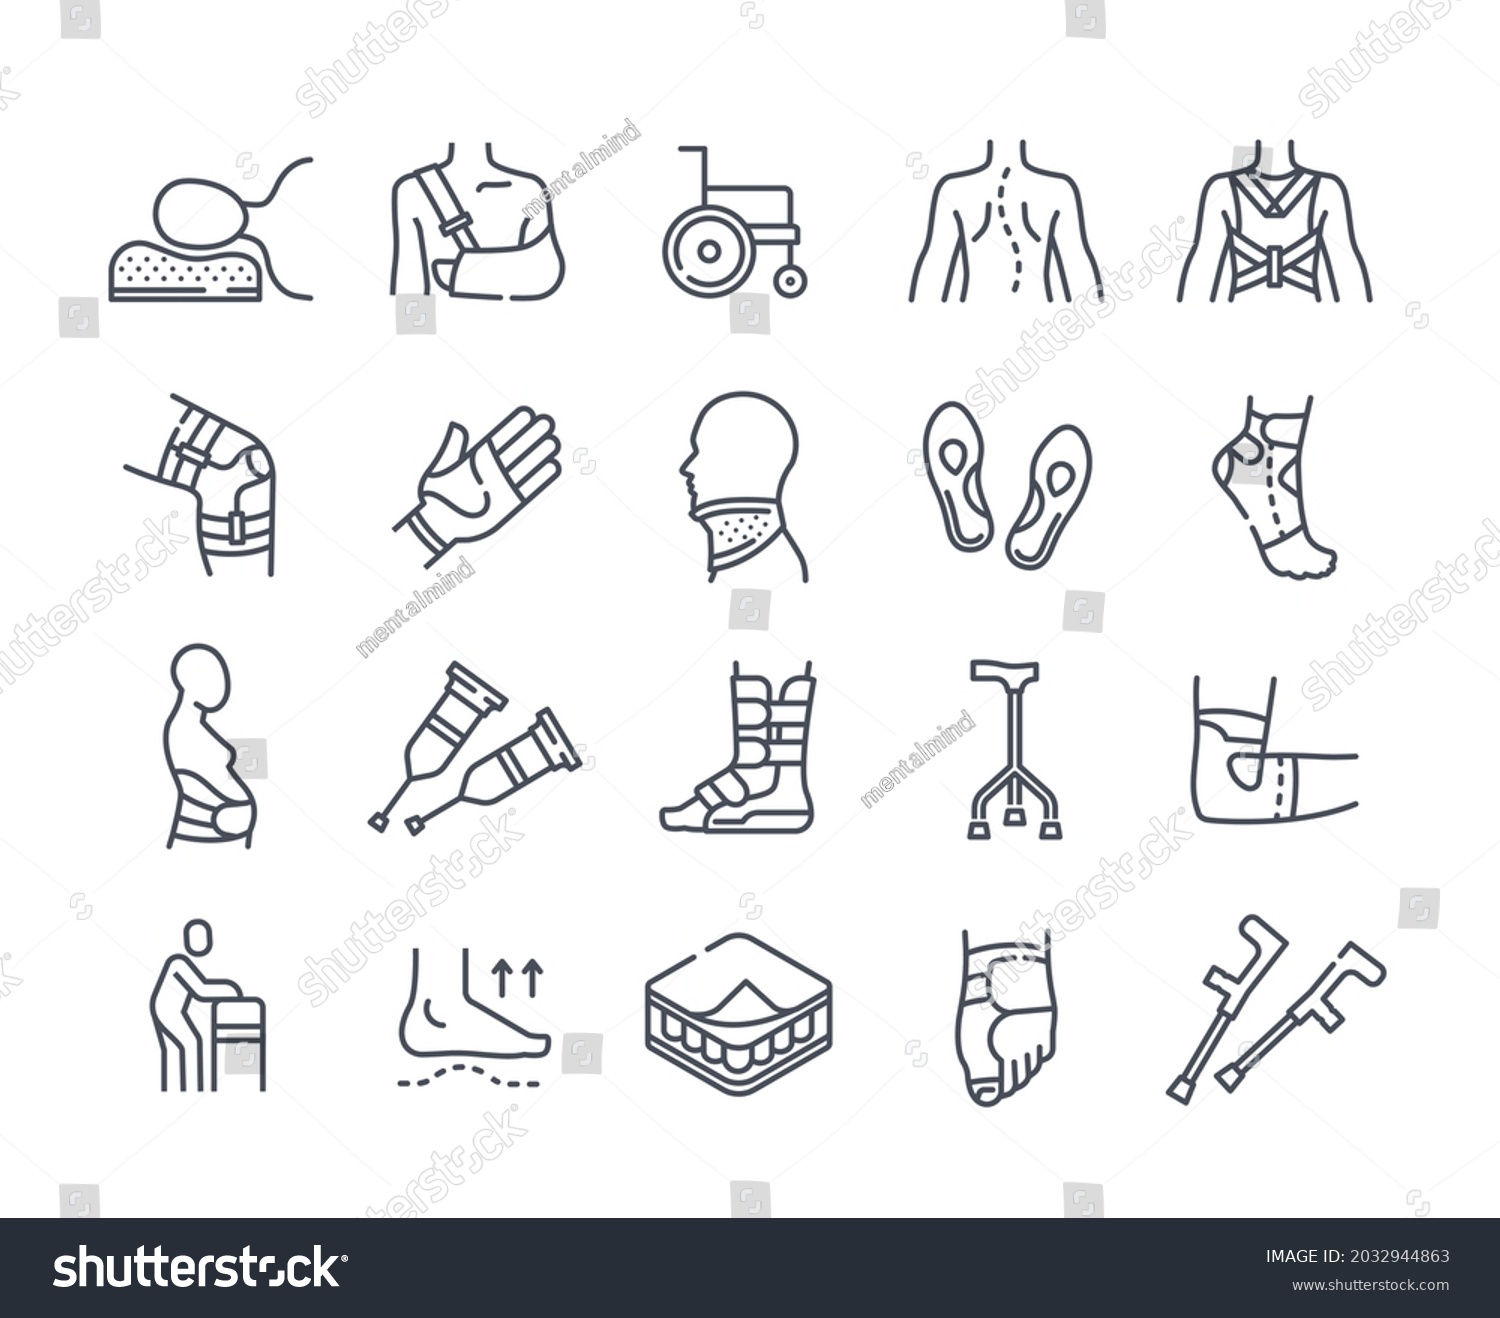 SVG of Medical Orthopedic Icons. Line of art stickers with various injuries of bones and joints. Body parts with bandages. Design elements for web. Cartoon flat vector set isolated on white background svg